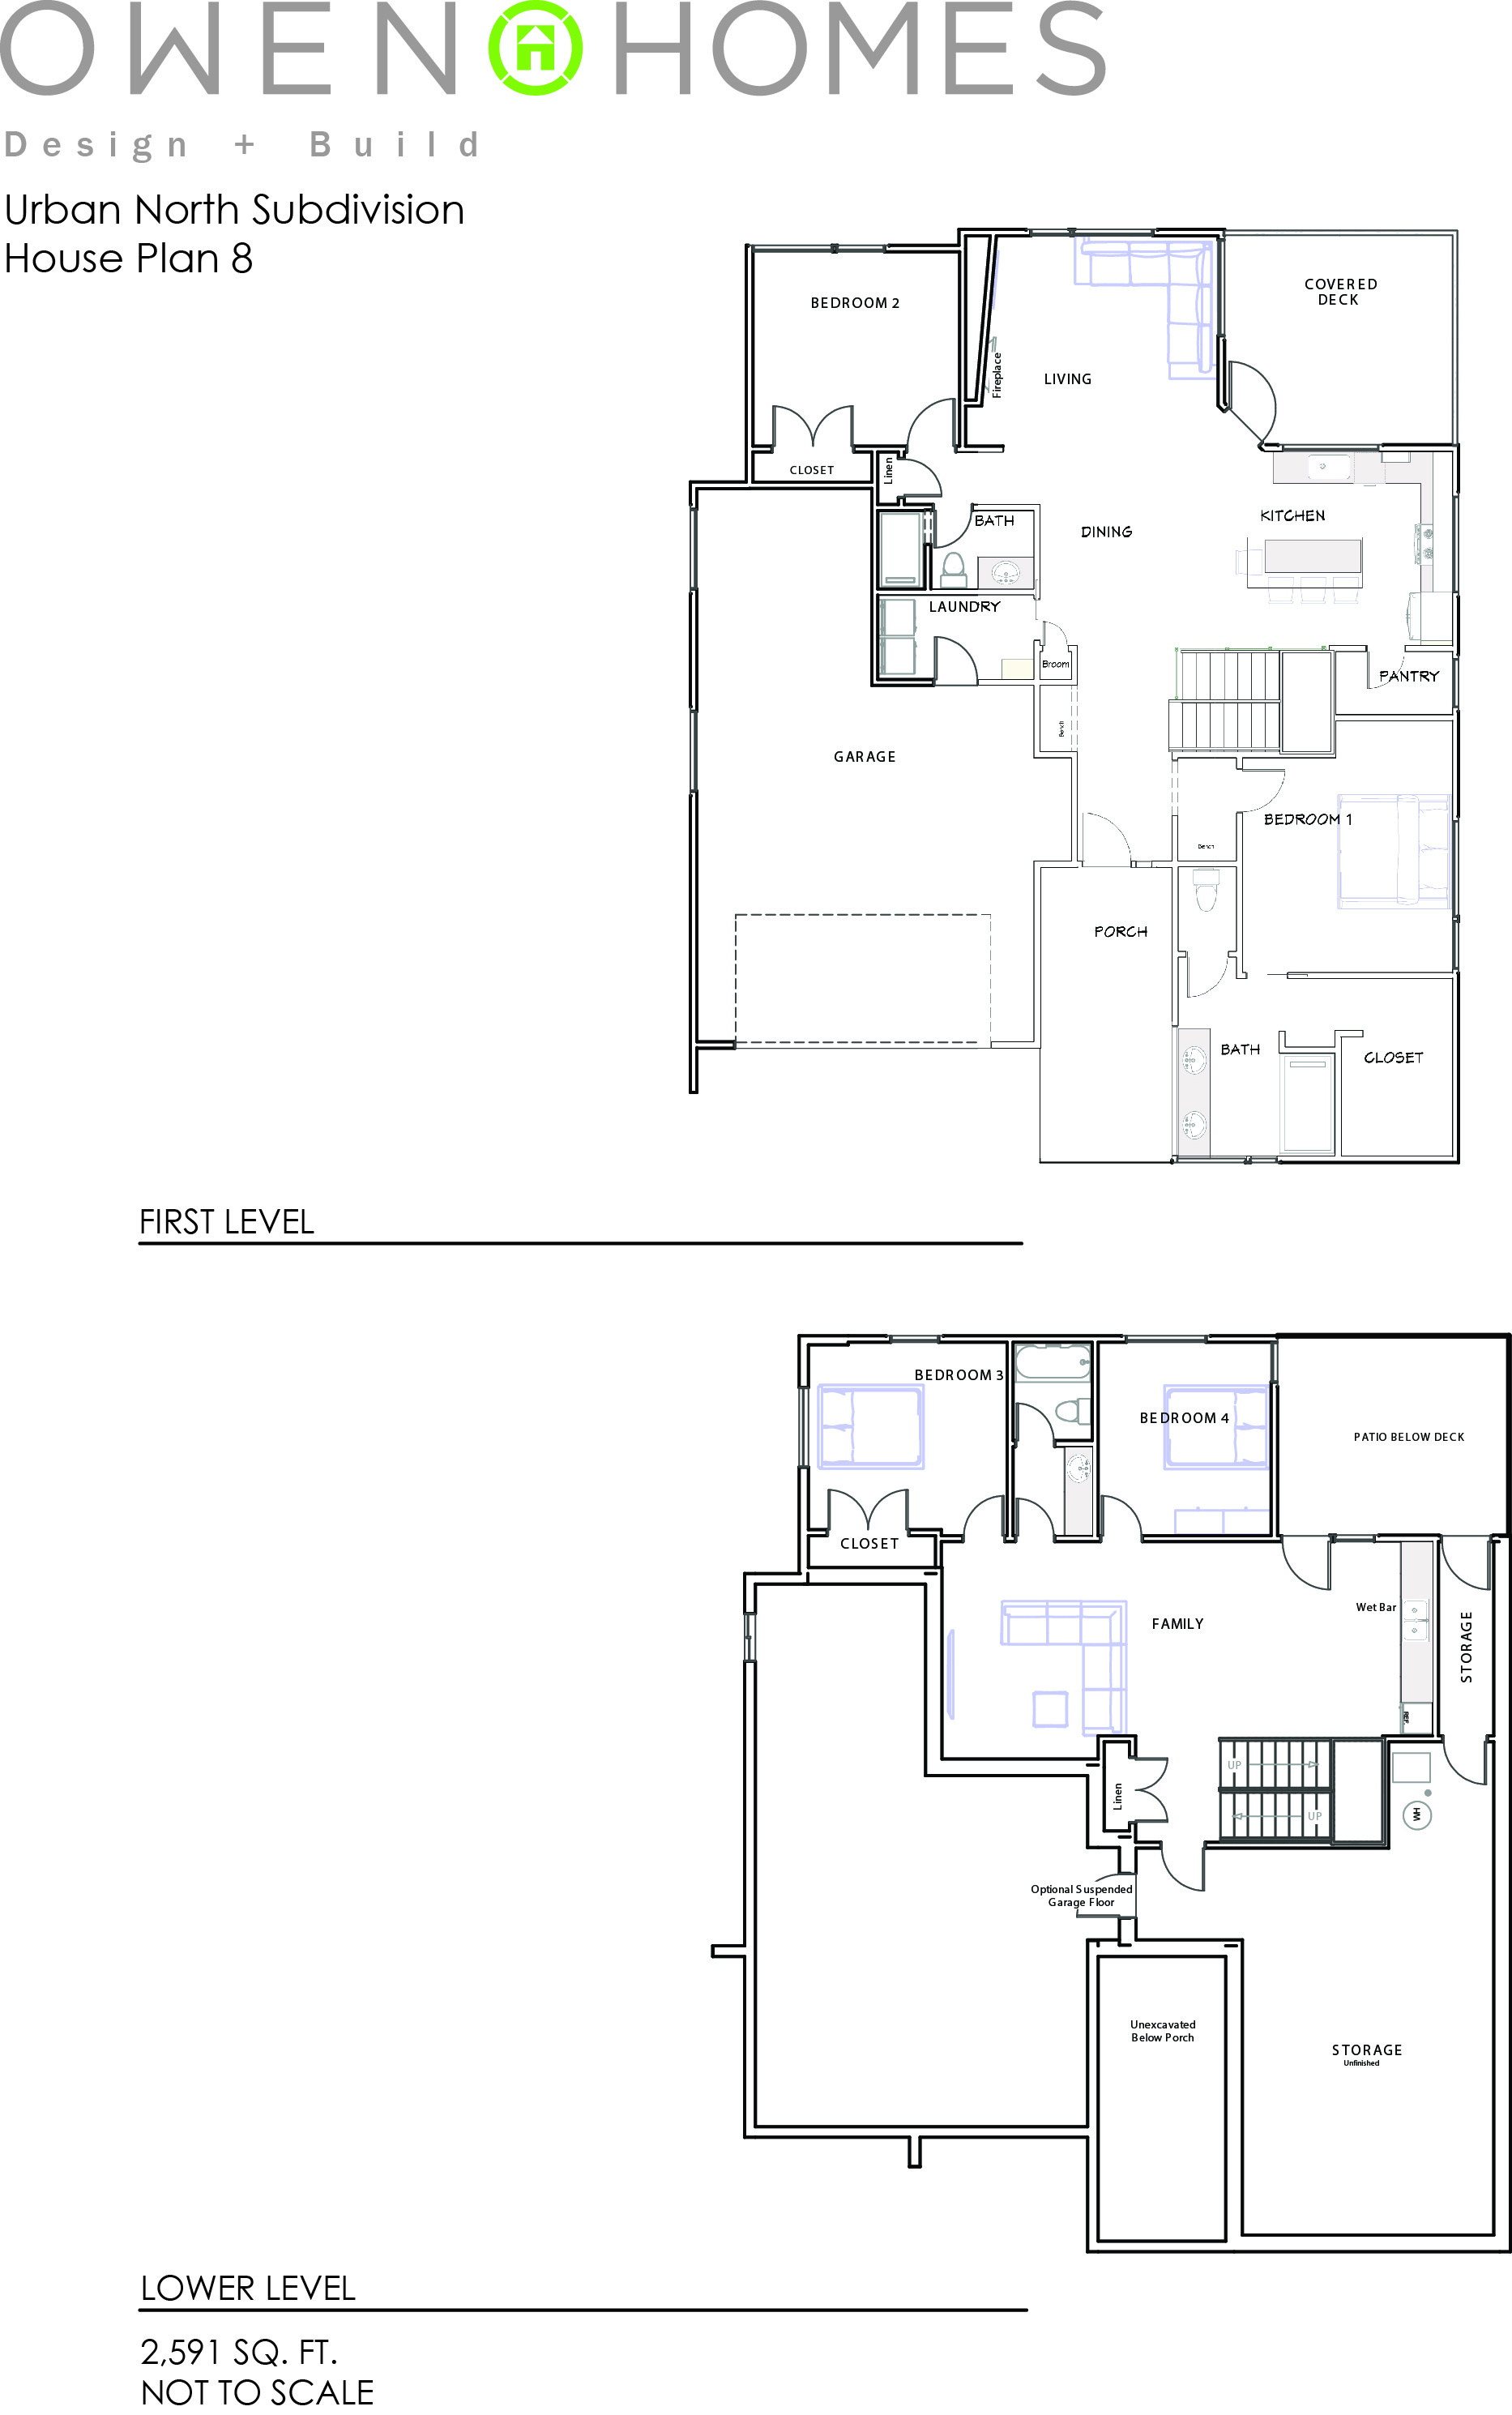 Urban North - House Plan 8 showing main and lower level floorplans